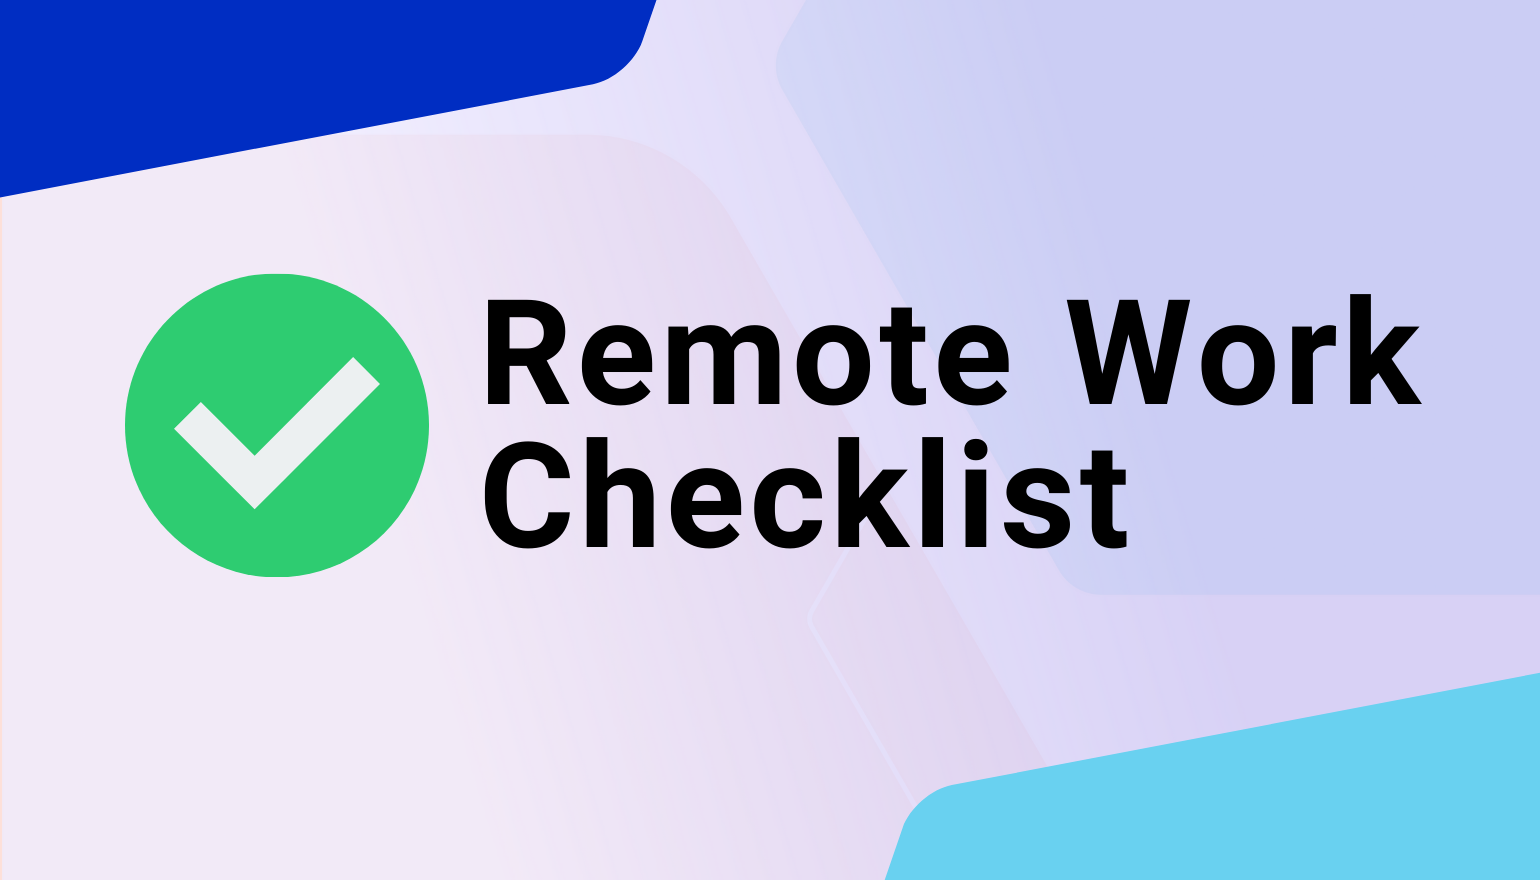 Making remote work easier for your employees